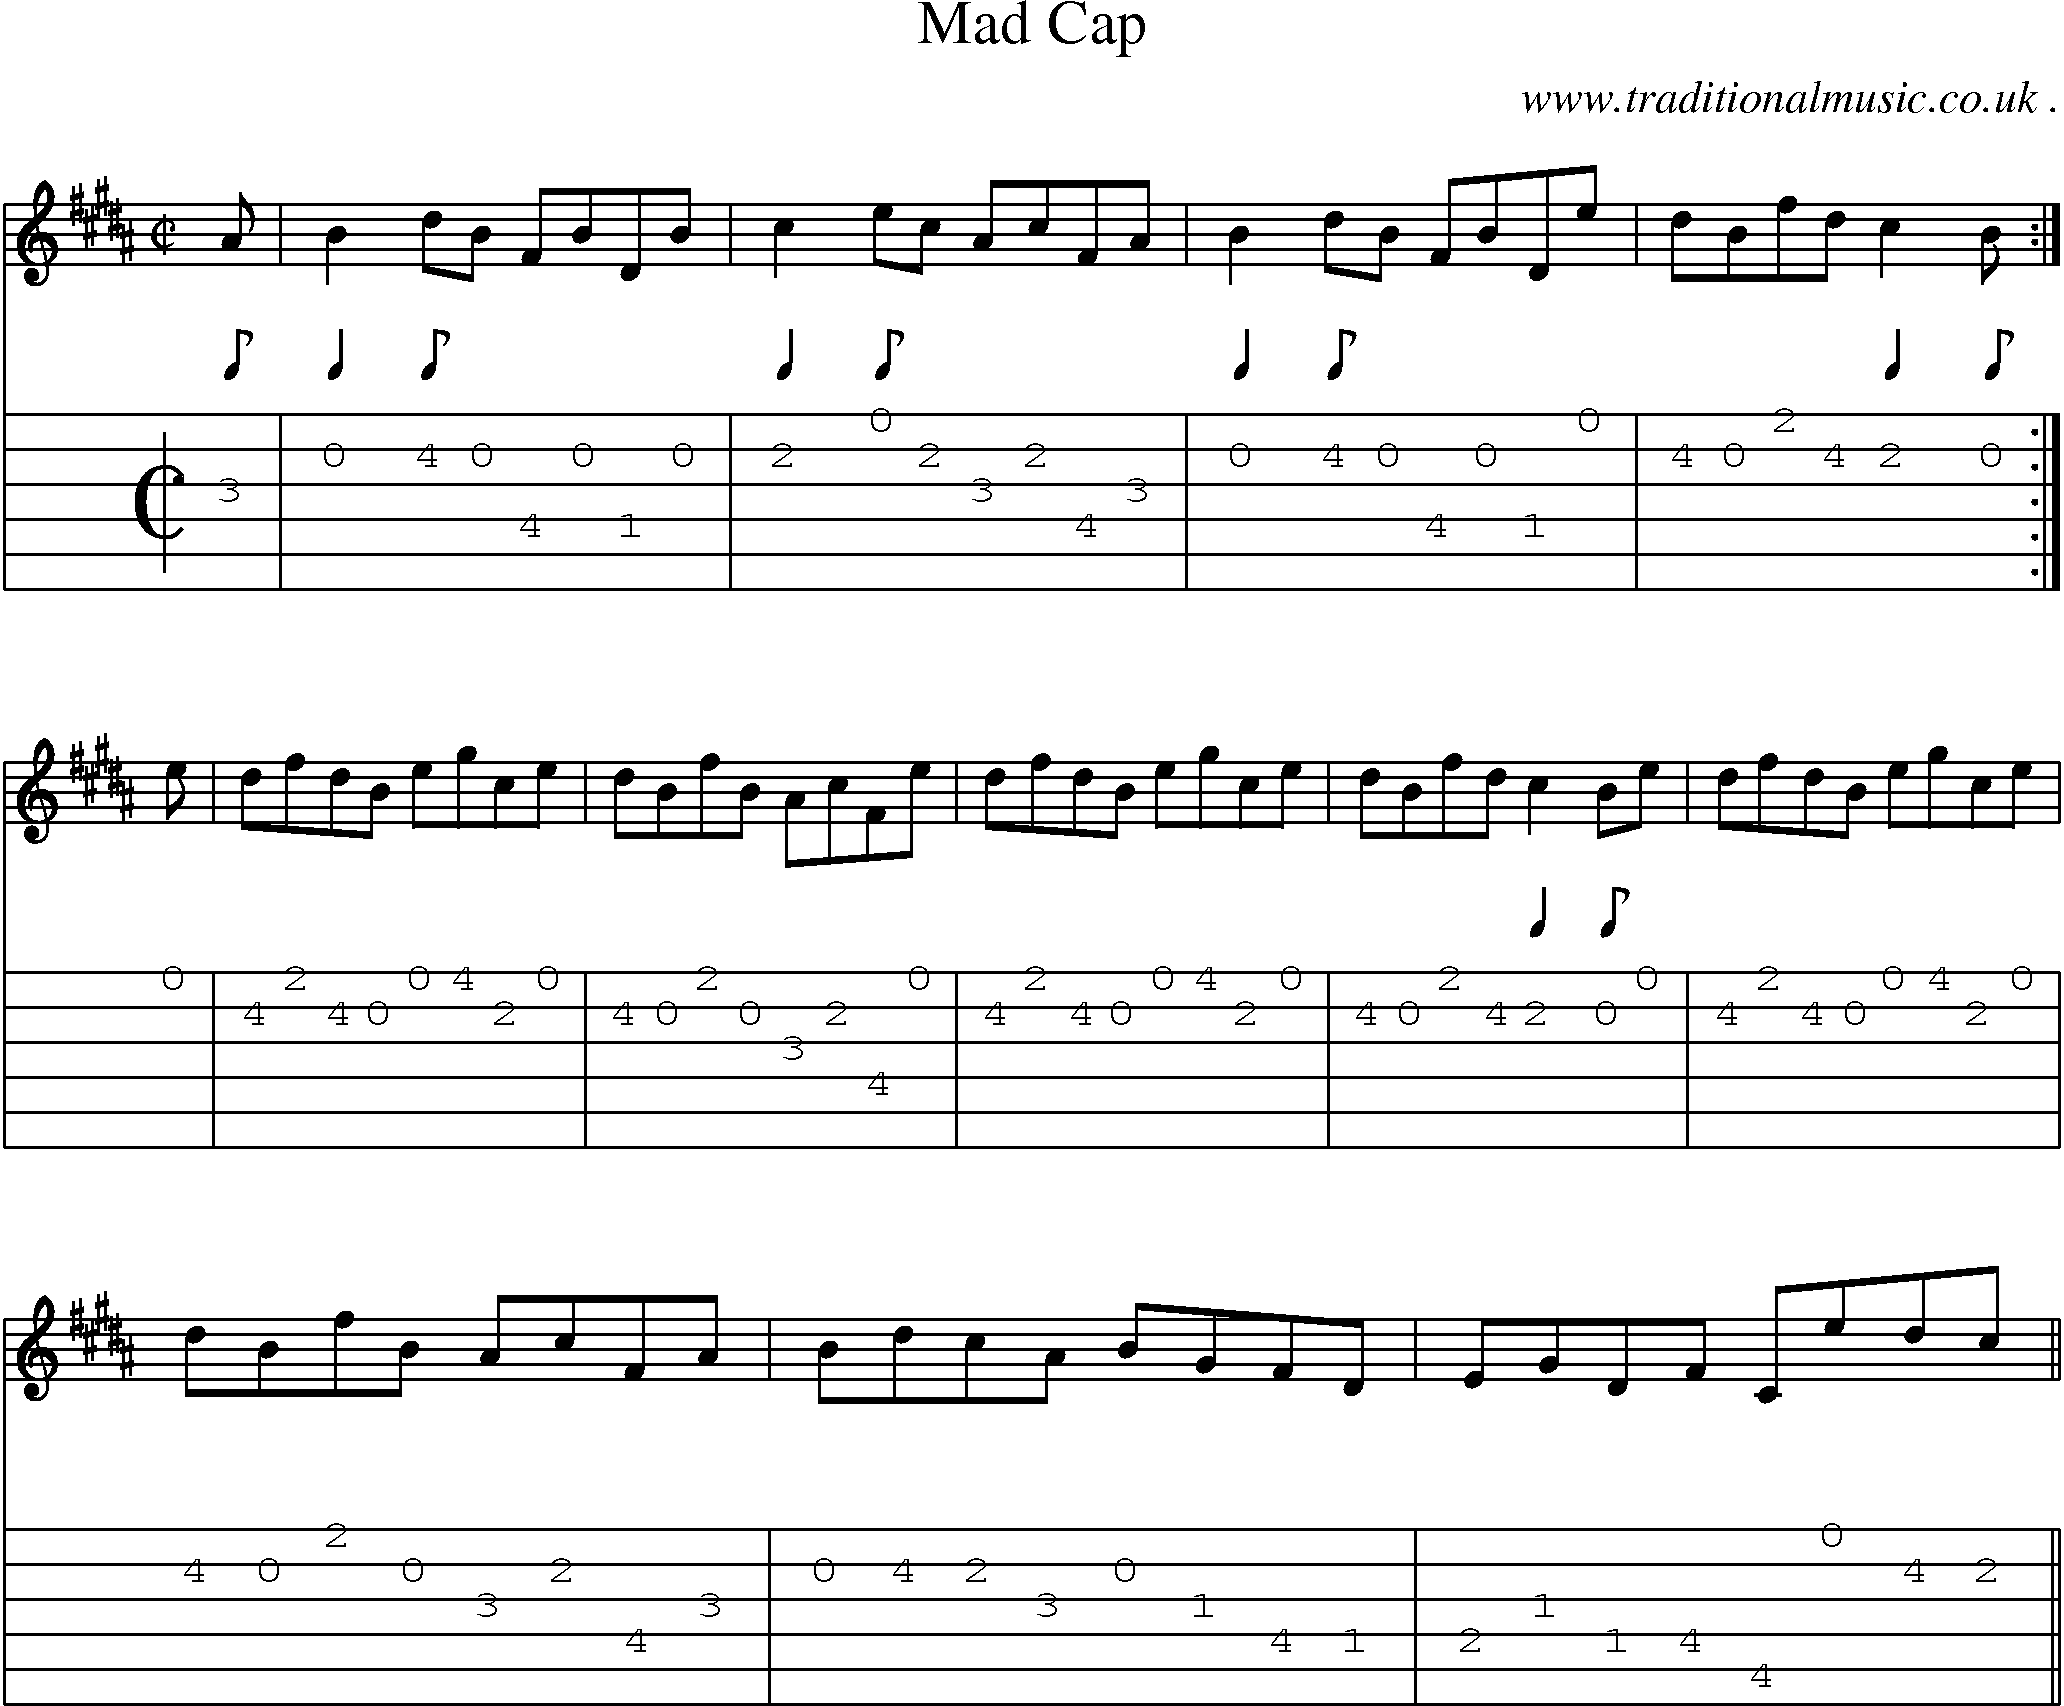 Sheet-music  score, Chords and Guitar Tabs for Mad Cap